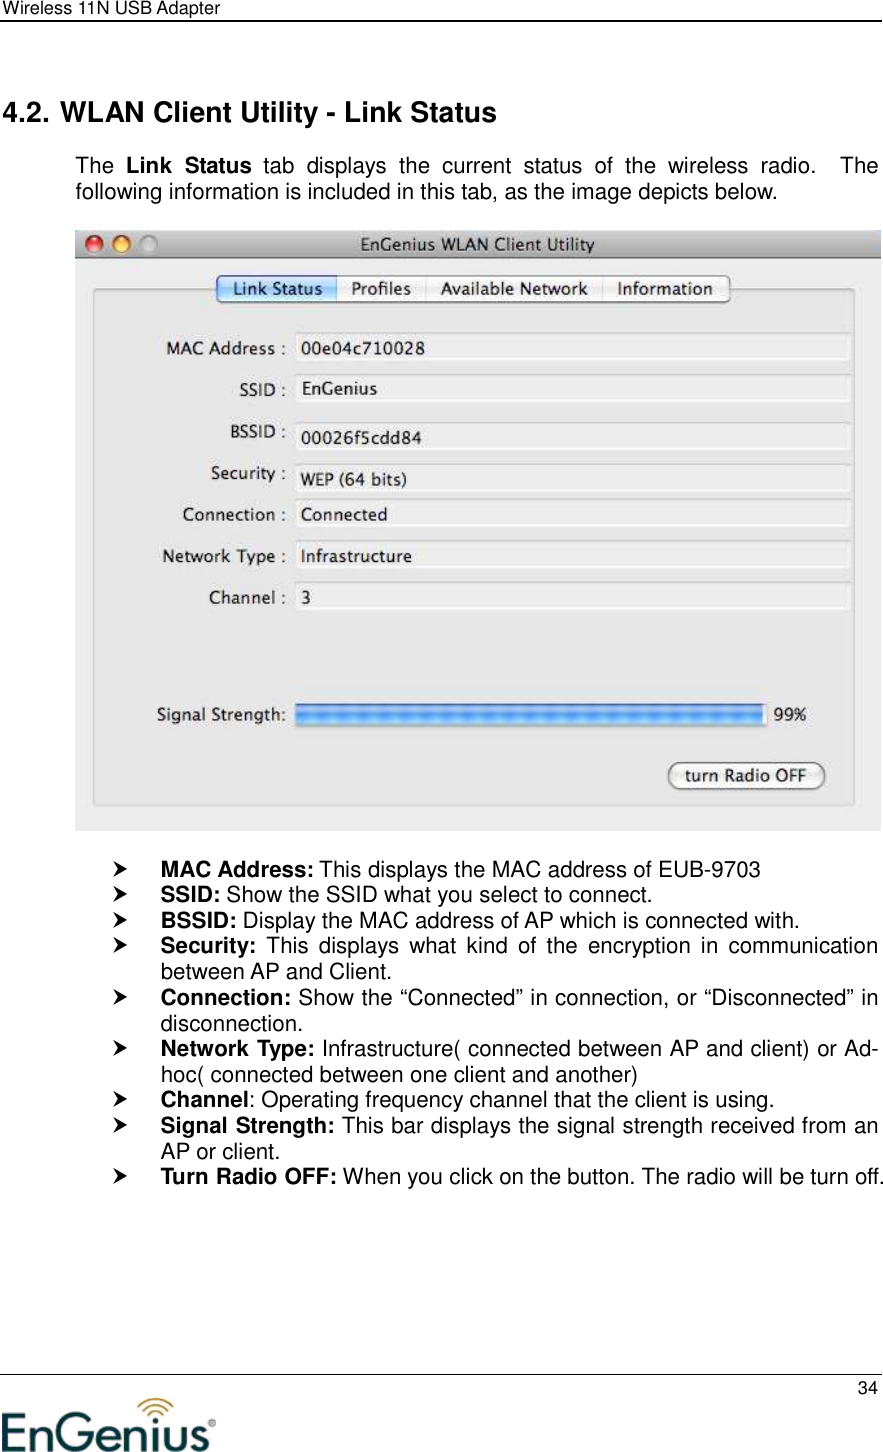 Wireless 11N USB Adapter  34   4.2. WLAN Client Utility - Link Status The  Link  Status  tab  displays  the  current  status  of  the  wireless  radio.    The following information is included in this tab, as the image depicts below.     MAC Address: This displays the MAC address of EUB-9703  SSID: Show the SSID what you select to connect.  BSSID: Display the MAC address of AP which is connected with.  Security:  This  displays what  kind  of the  encryption  in  communication between AP and Client.  Connection: Show the “Connected” in connection, or “Disconnected” in disconnection.  Network Type: Infrastructure( connected between AP and client) or Ad-hoc( connected between one client and another)  Channel: Operating frequency channel that the client is using.  Signal Strength: This bar displays the signal strength received from an AP or client.  Turn Radio OFF: When you click on the button. The radio will be turn off. 